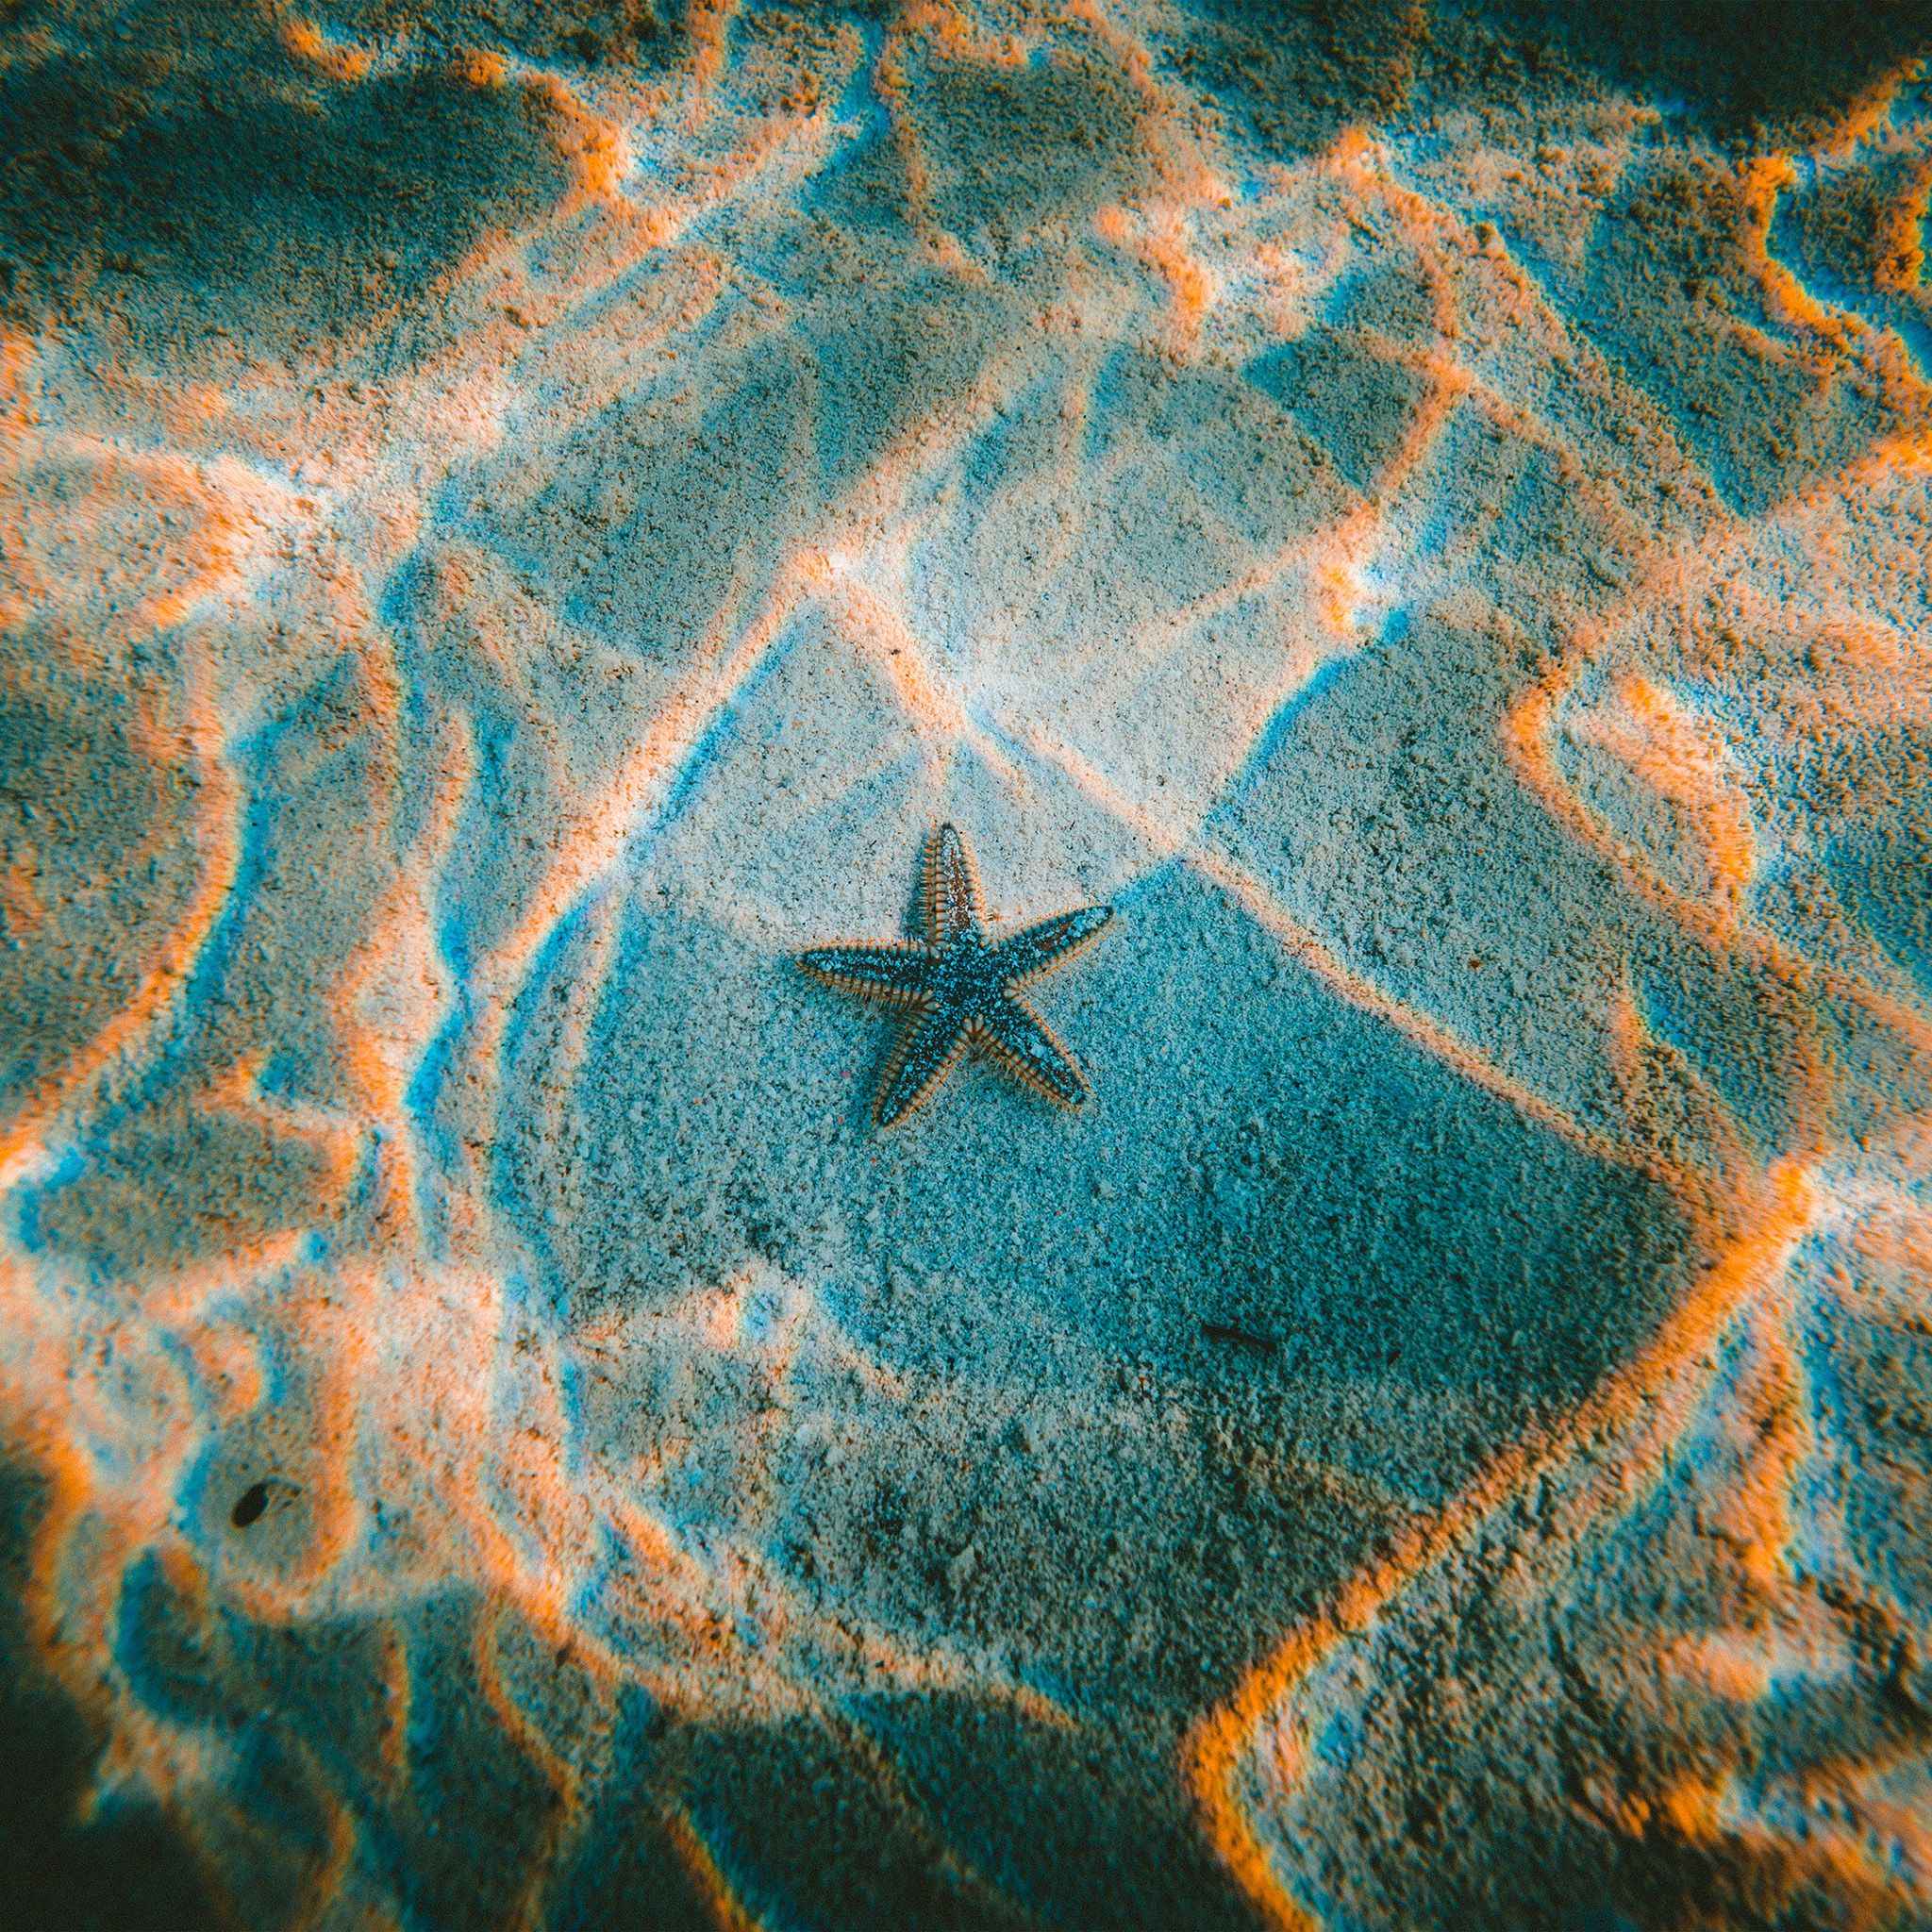 A starfish on the sand with a blue and orange reflection - Beach, mermaid